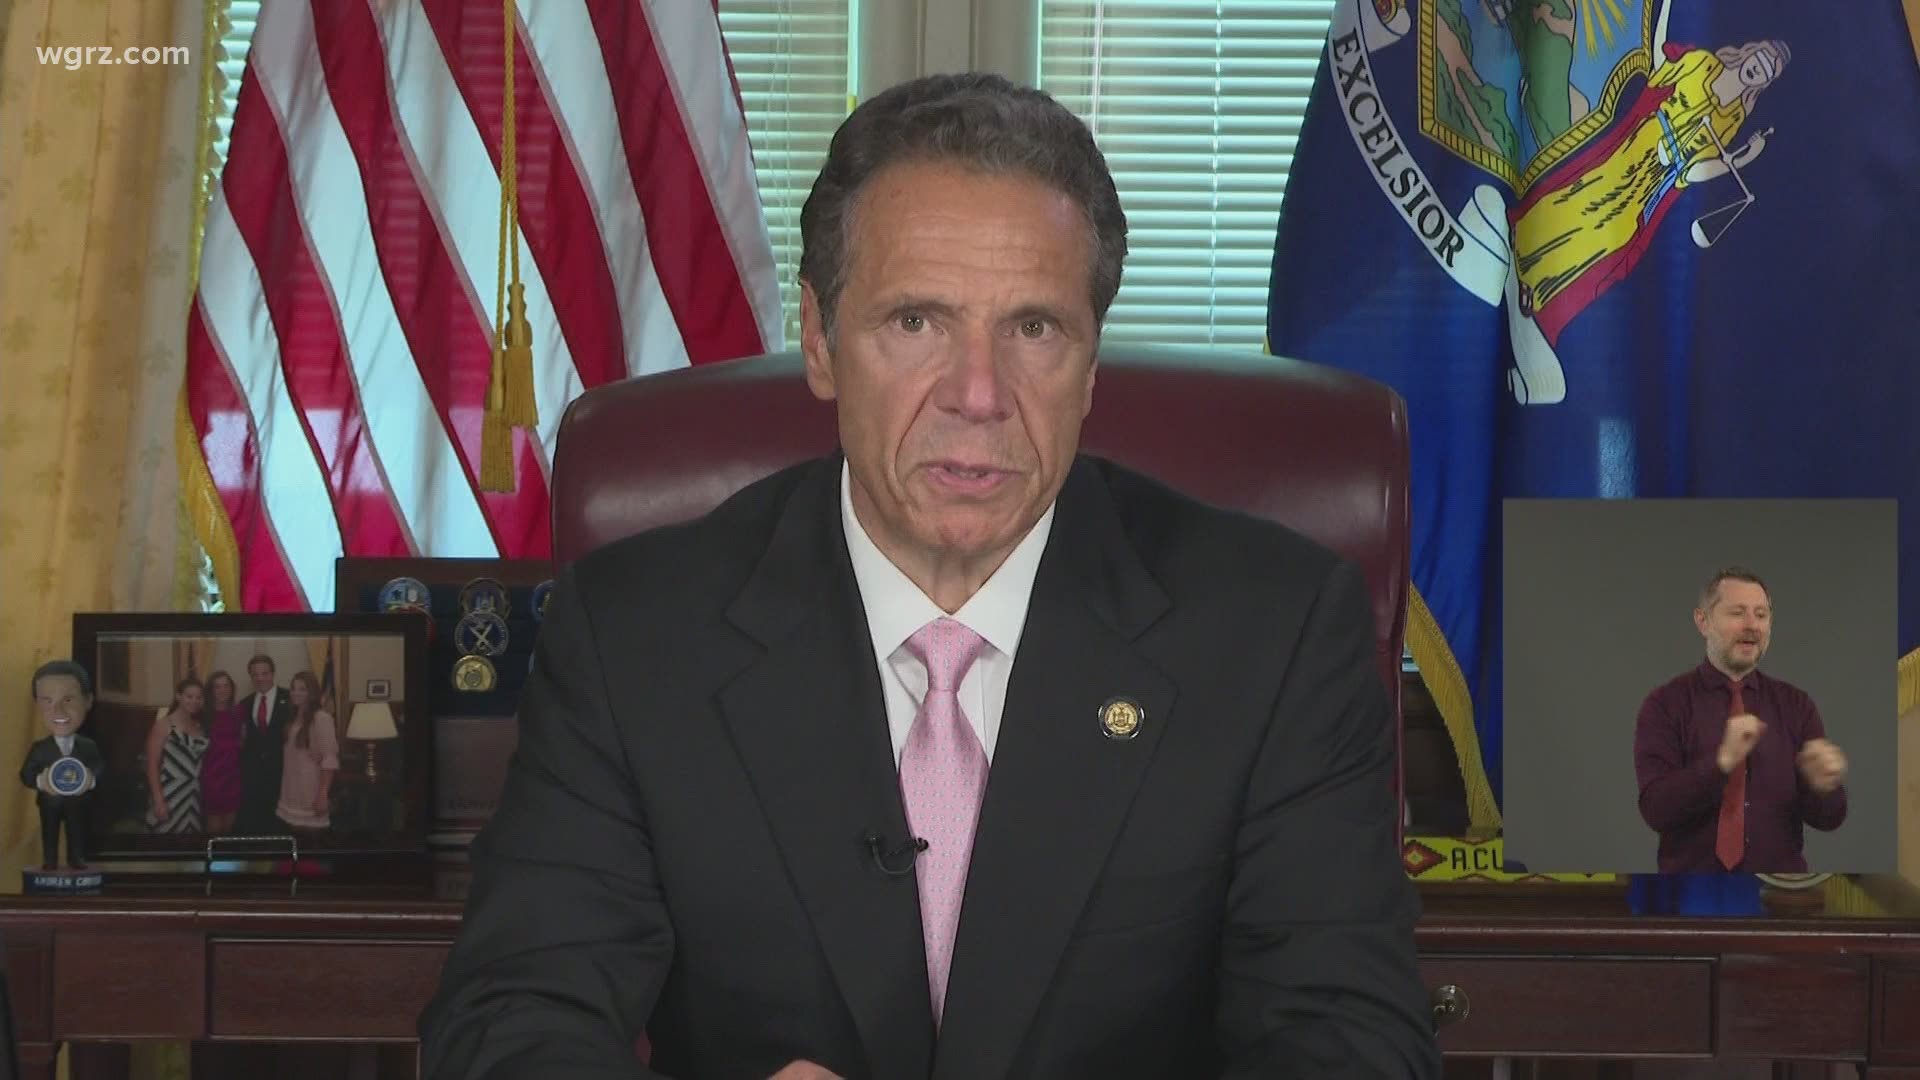 Gov. Cuomo gives final daily briefing on COVID-19